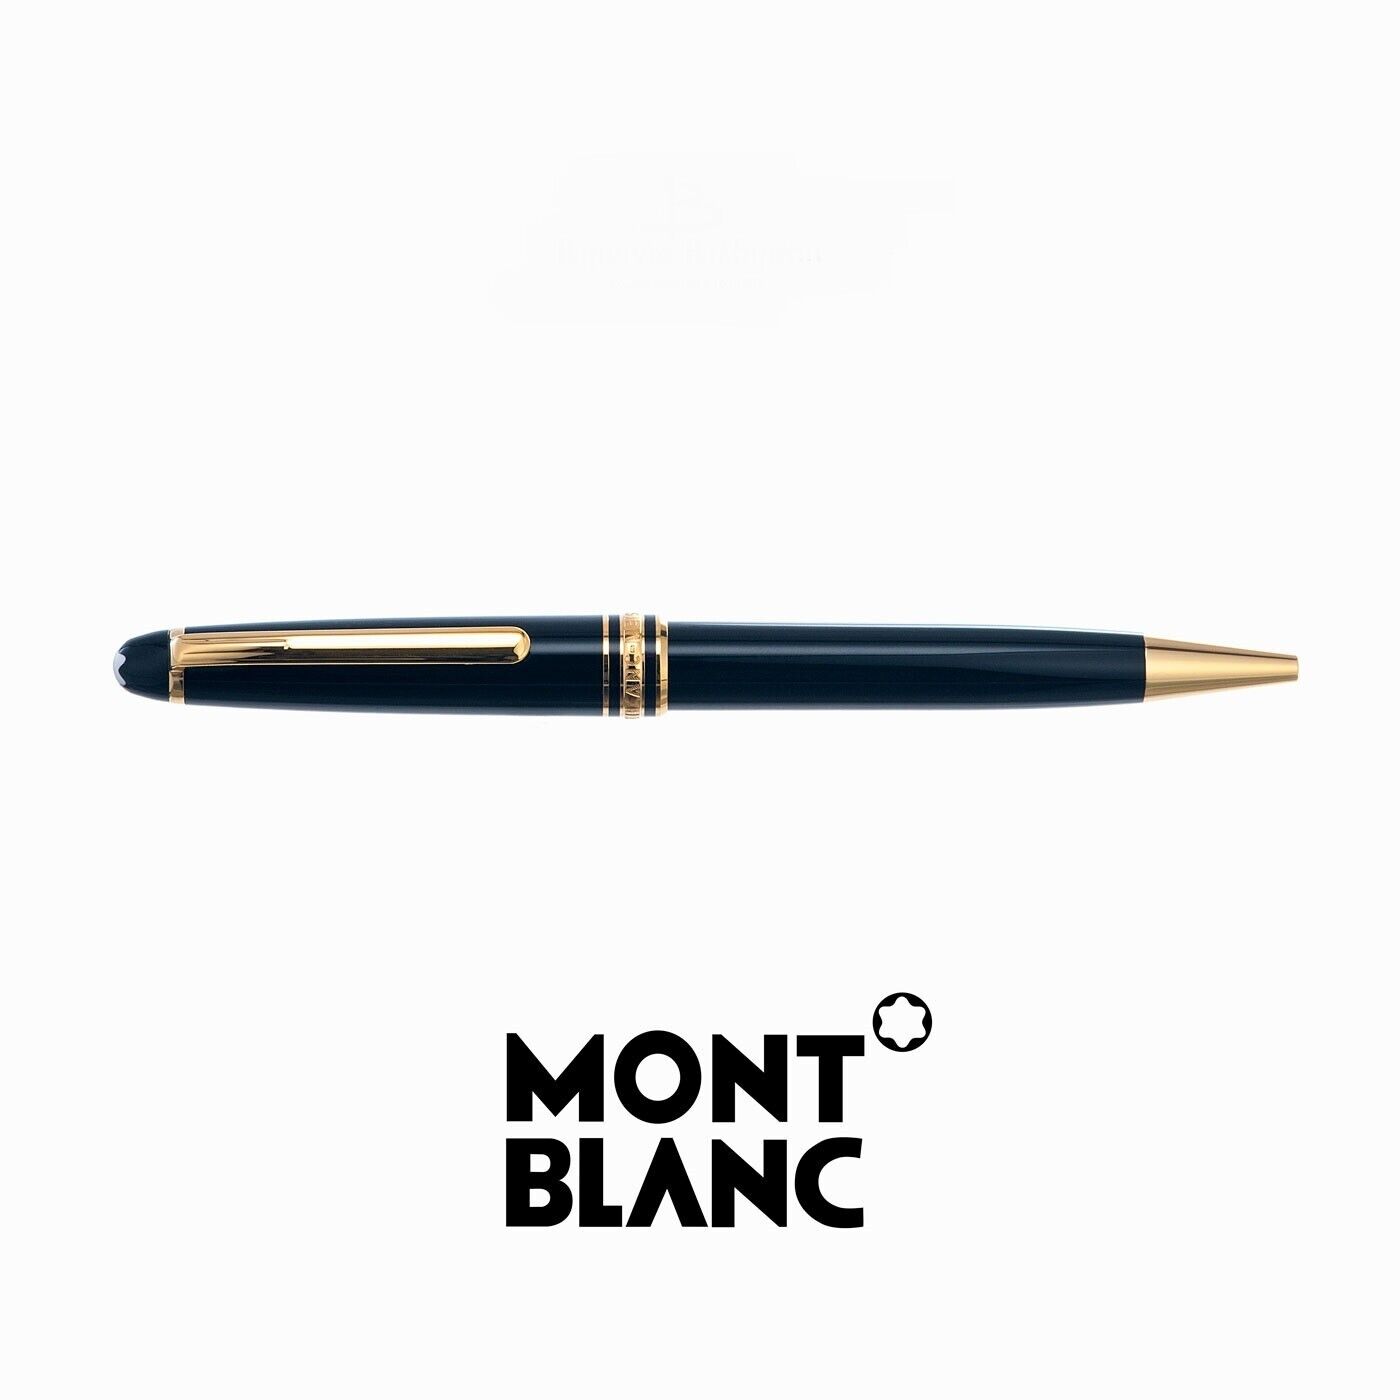 NEW Montblanc Gold Finish Meisterstuck Perfect Gift